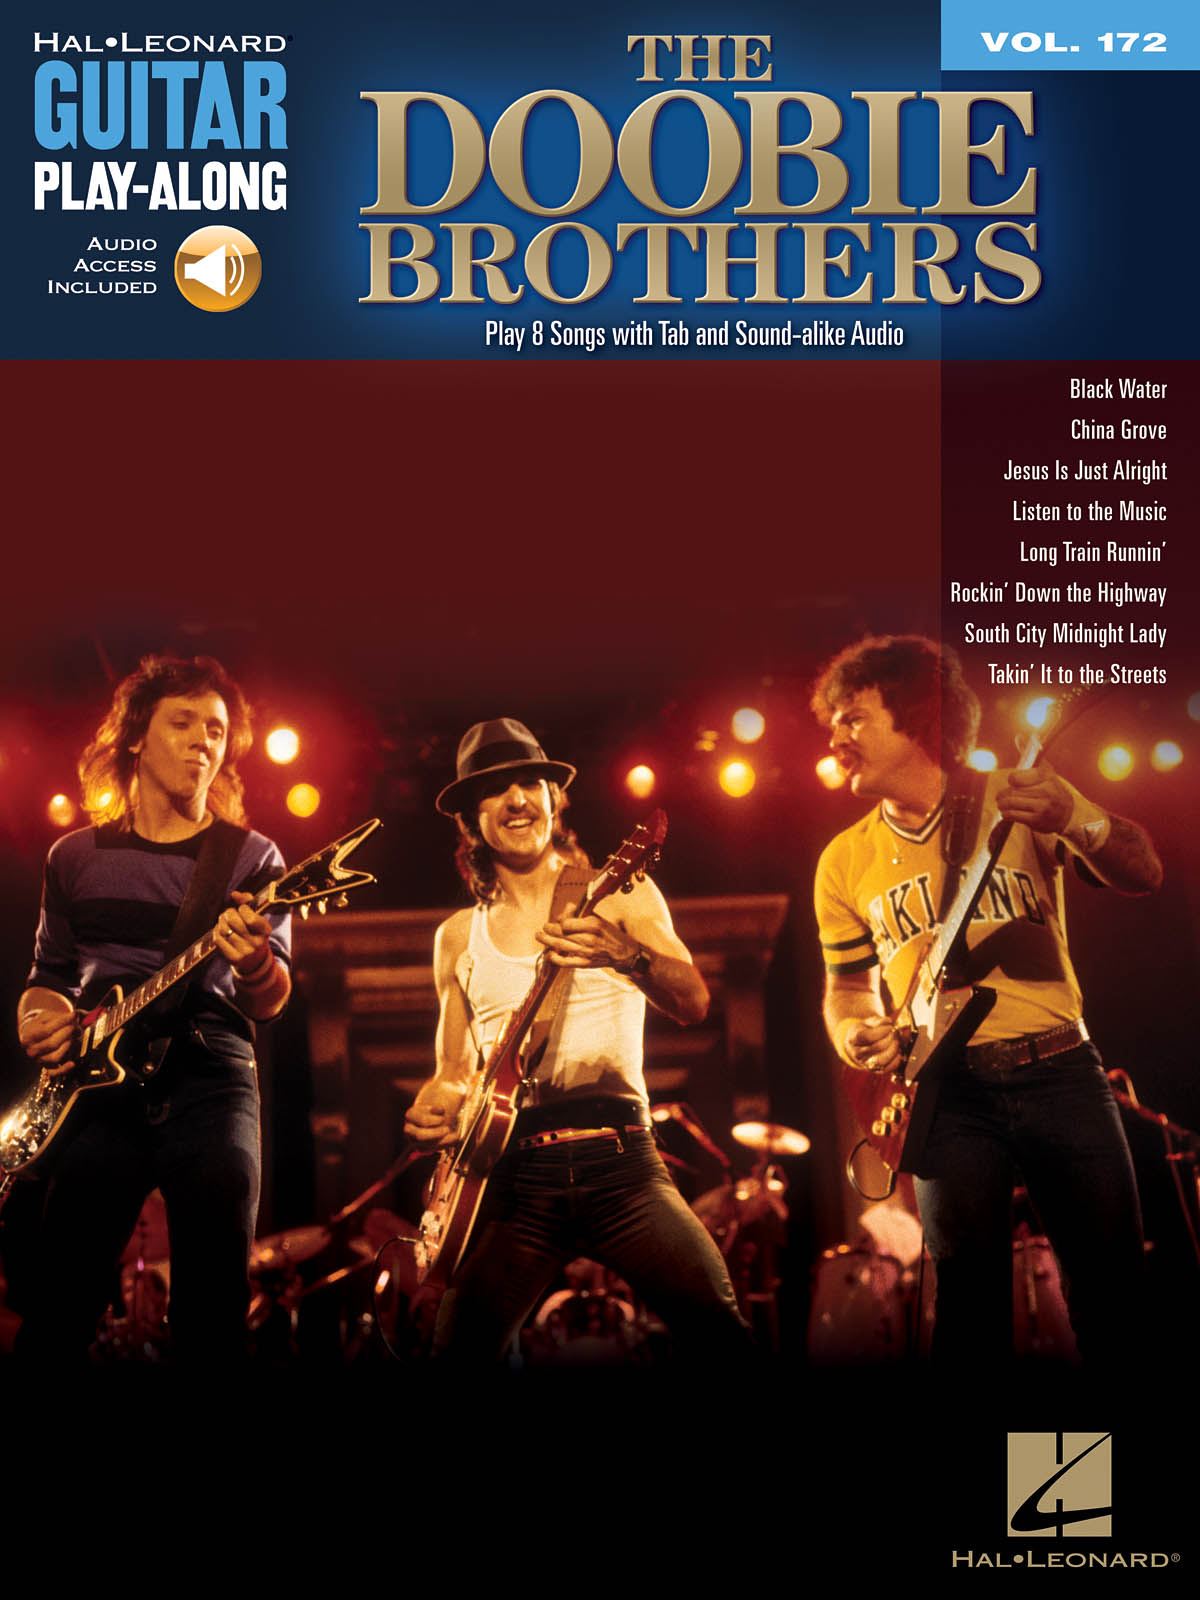 The Doobie Brothers - Guitar Play-Along Volume 172